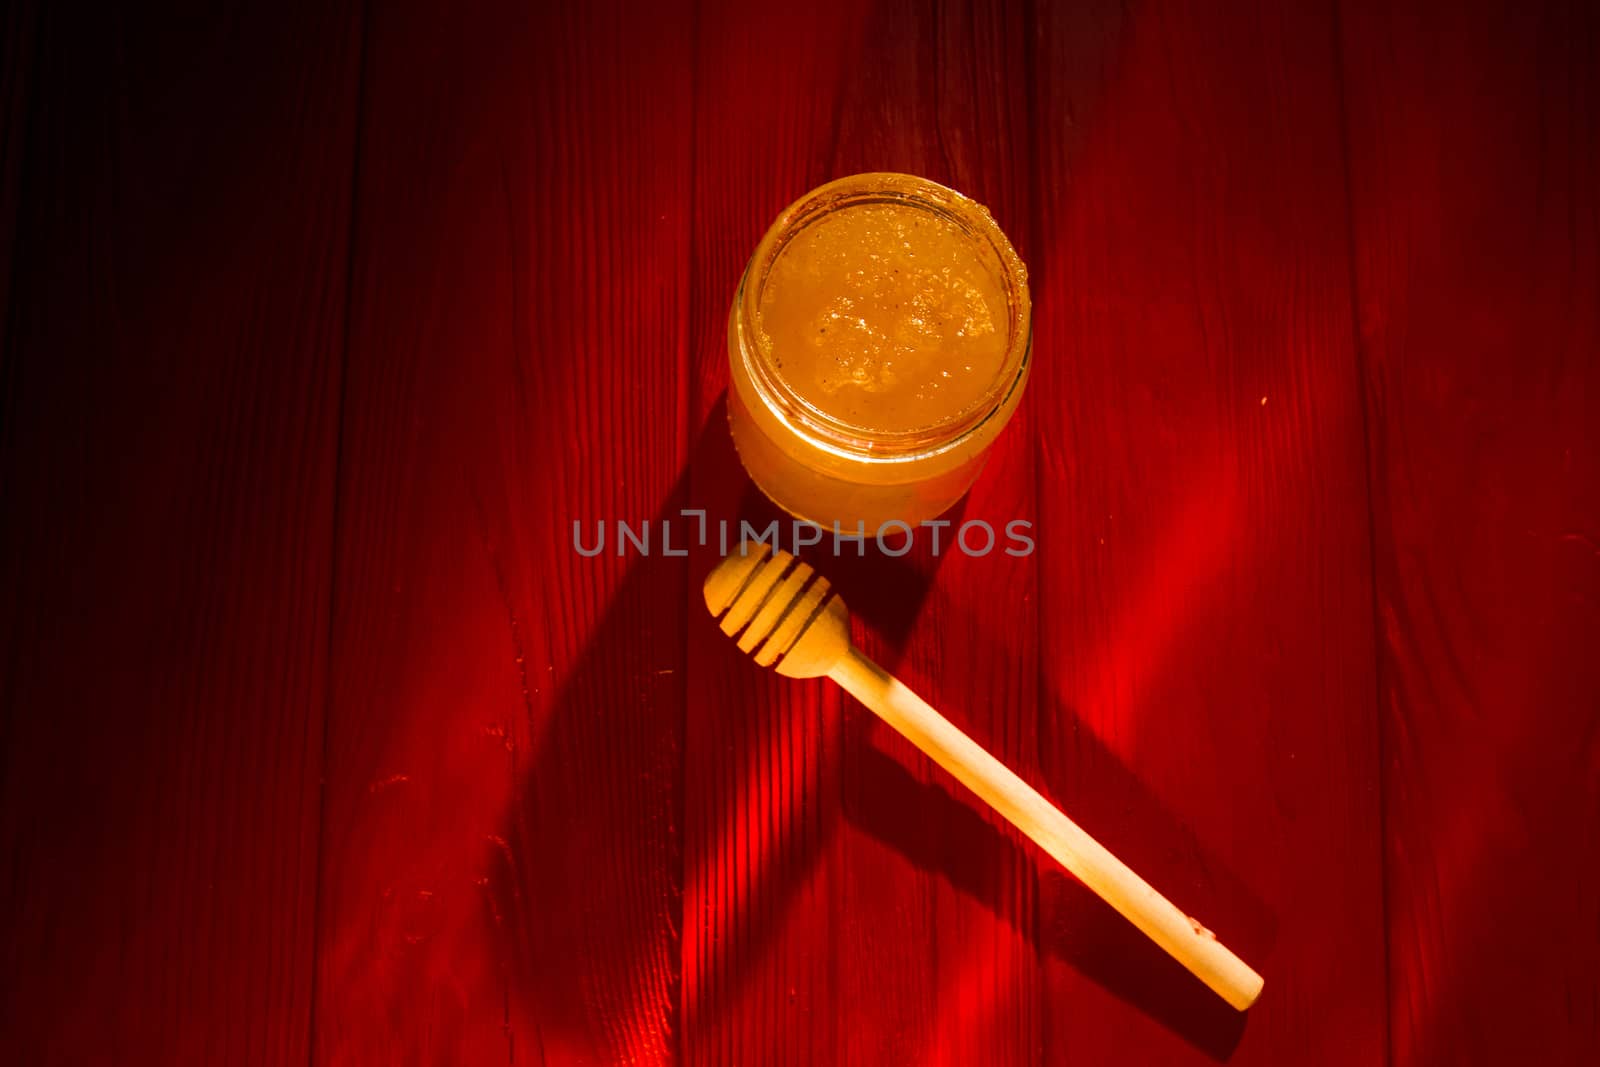 Honey with dipper on red wooden background with the the play of light and shadow